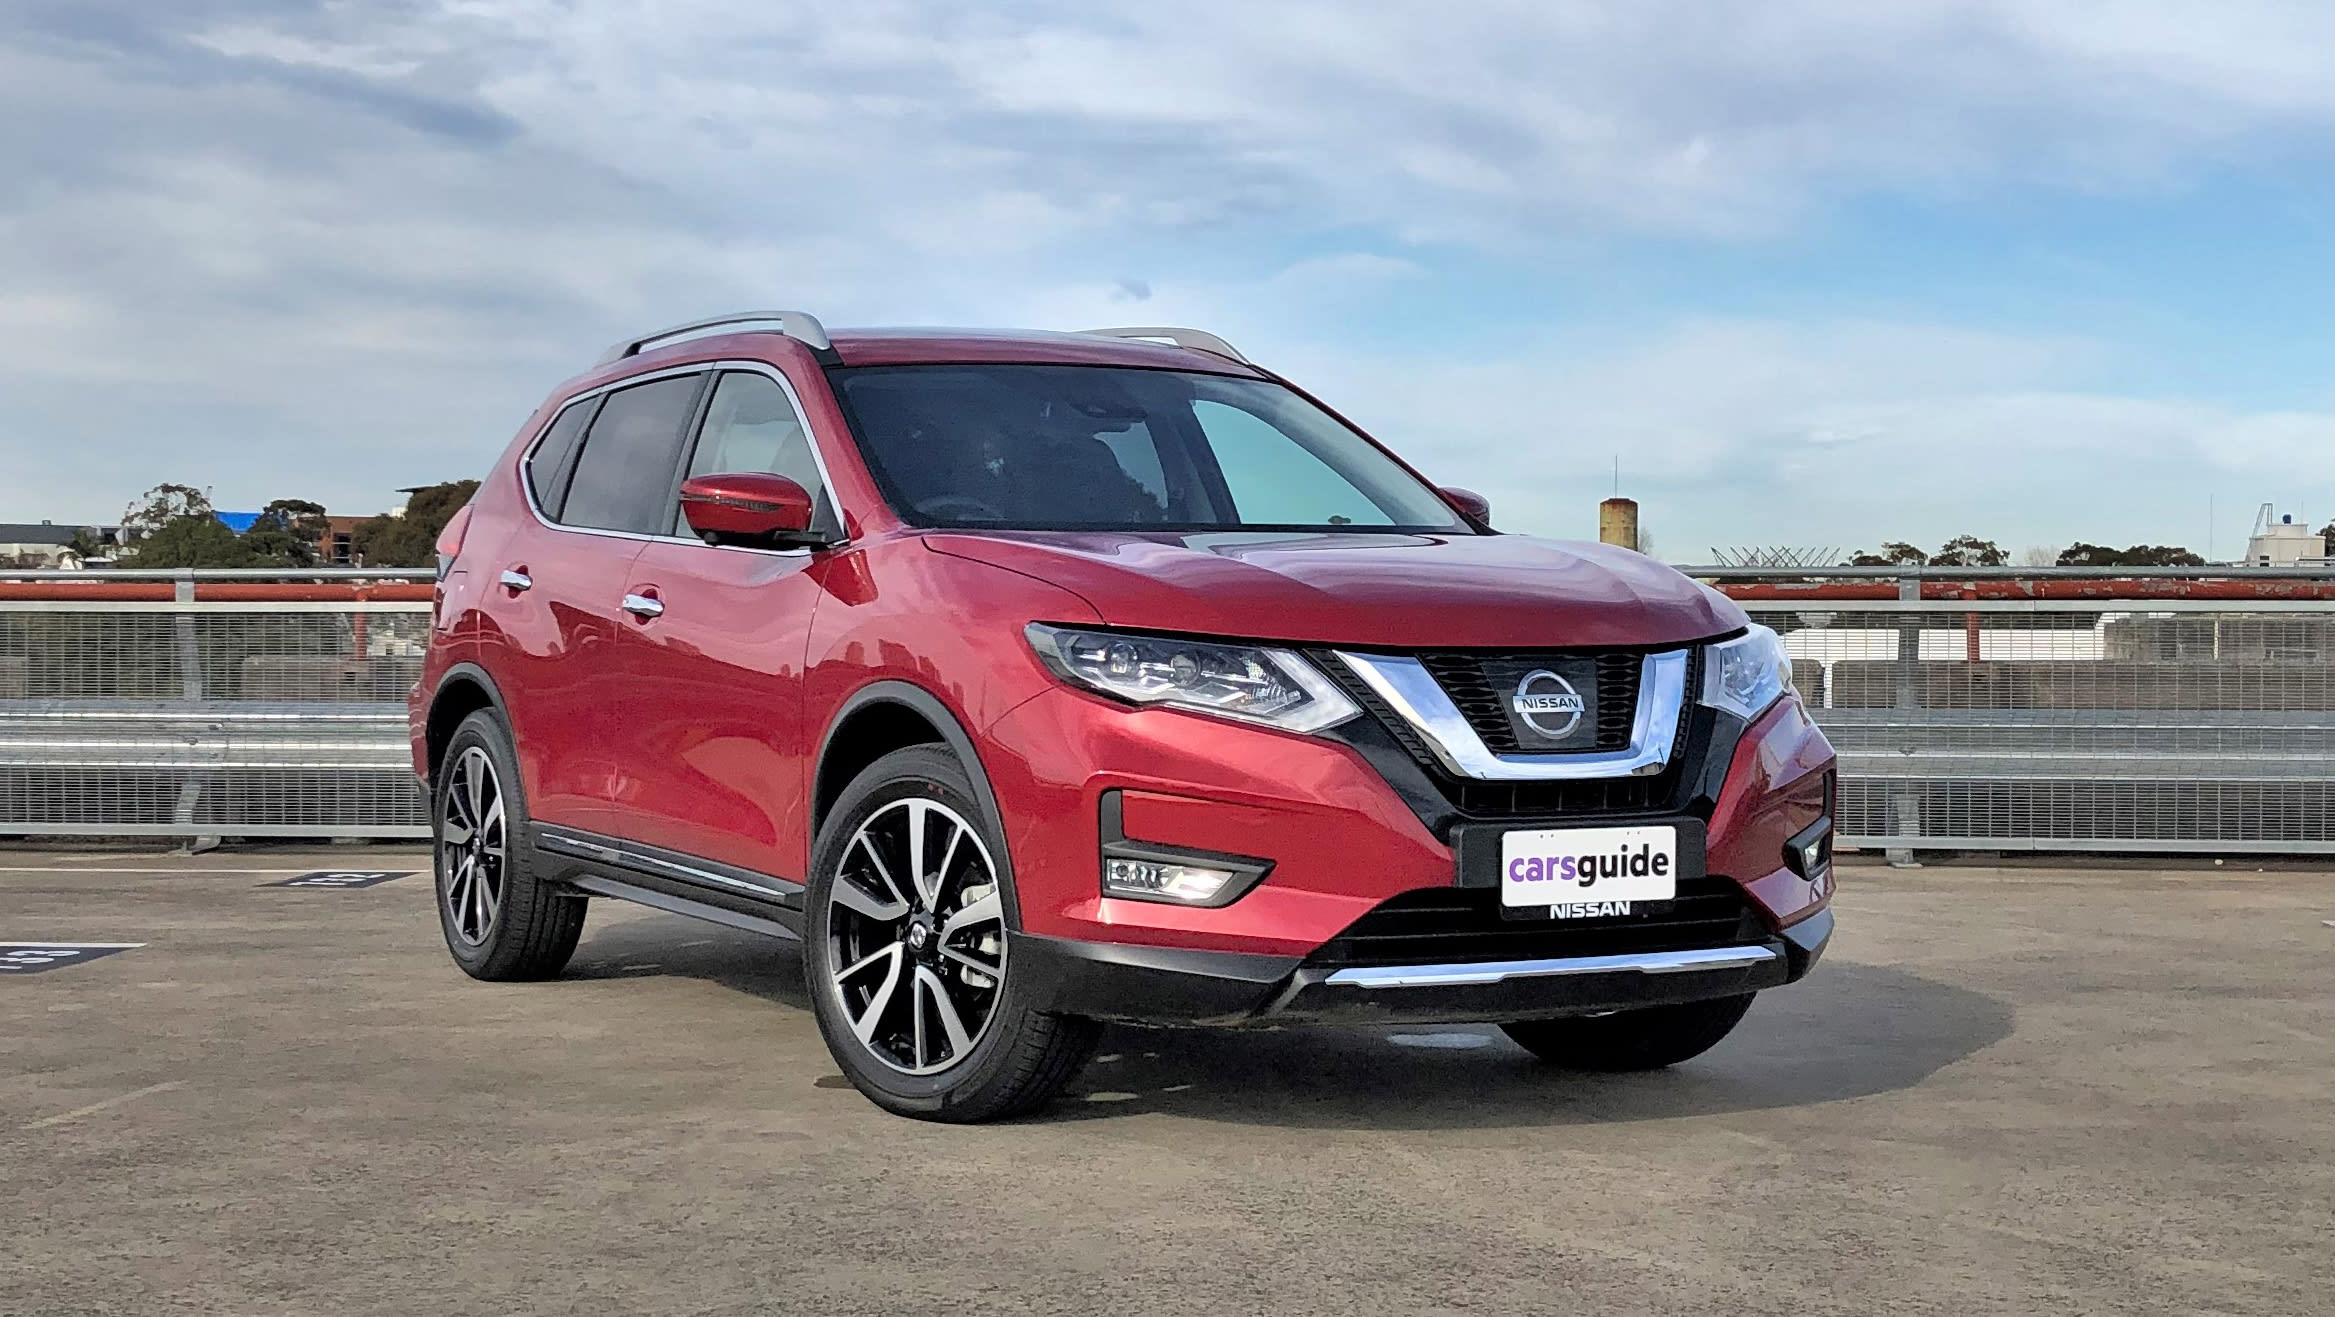 Nissan XTrail 2019 review Ti CarsGuide